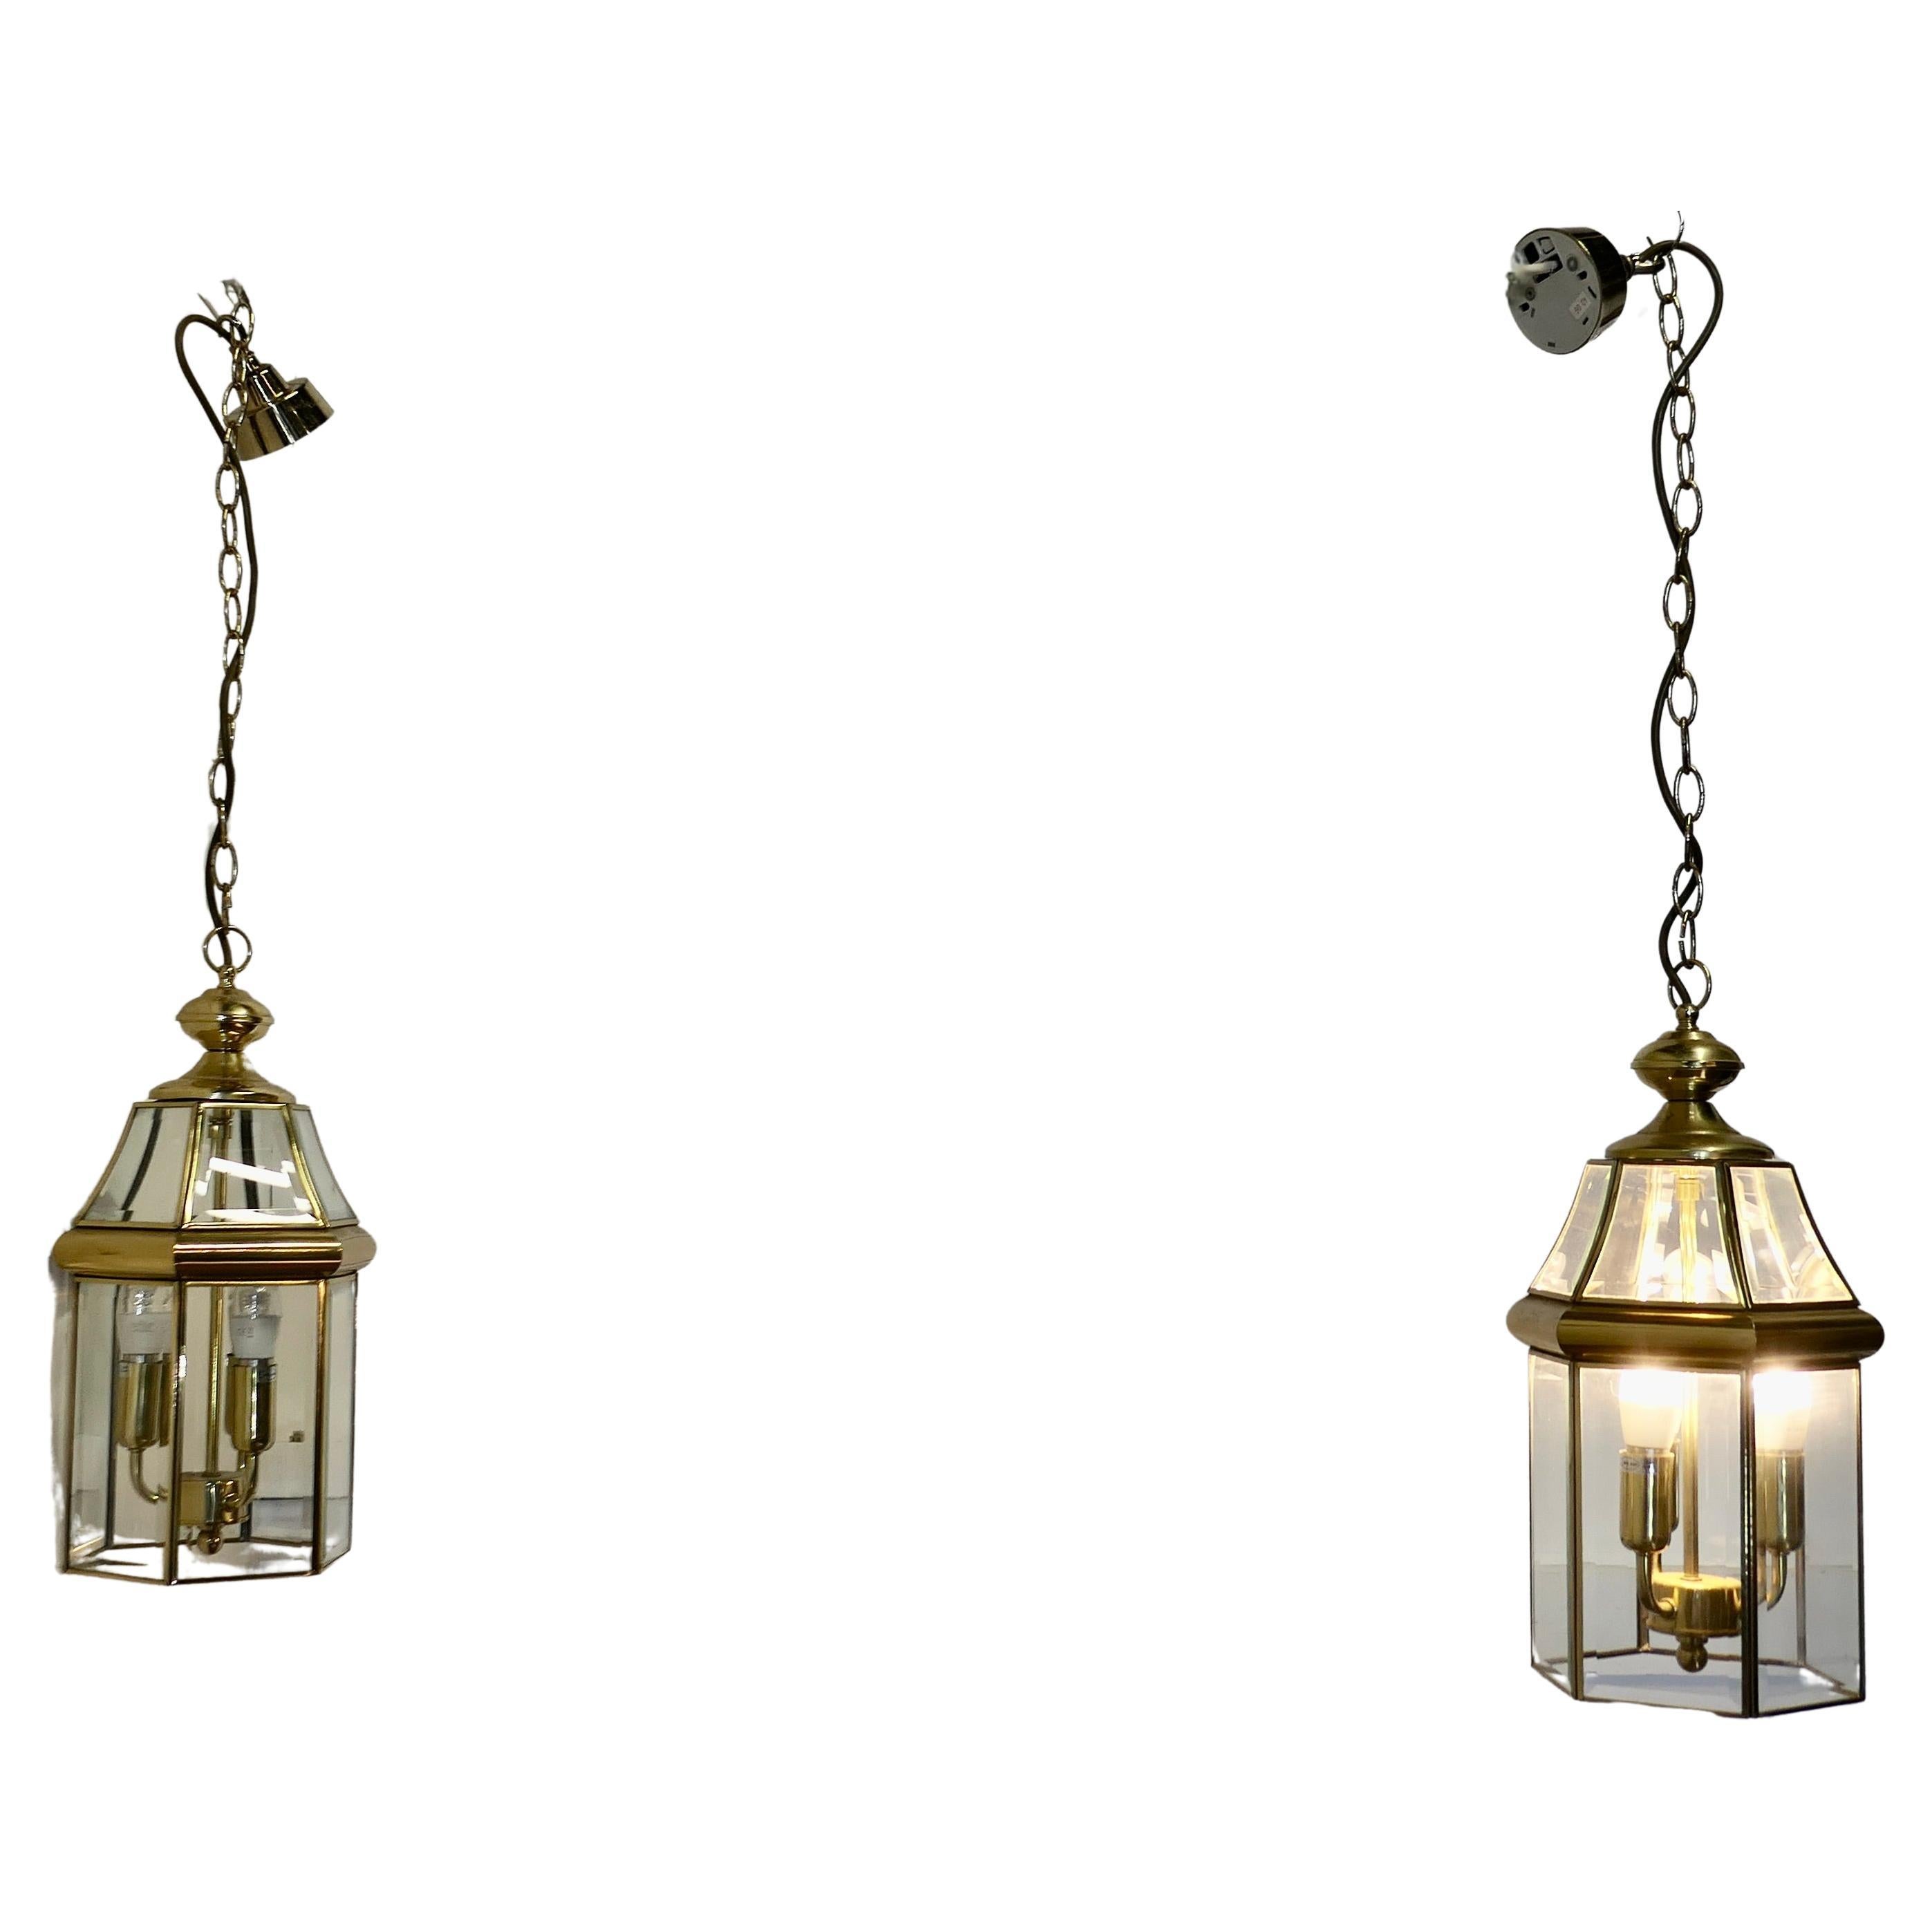 A Pair of  Art Deco Style Brass & Glass Hall Lanterns    For Sale